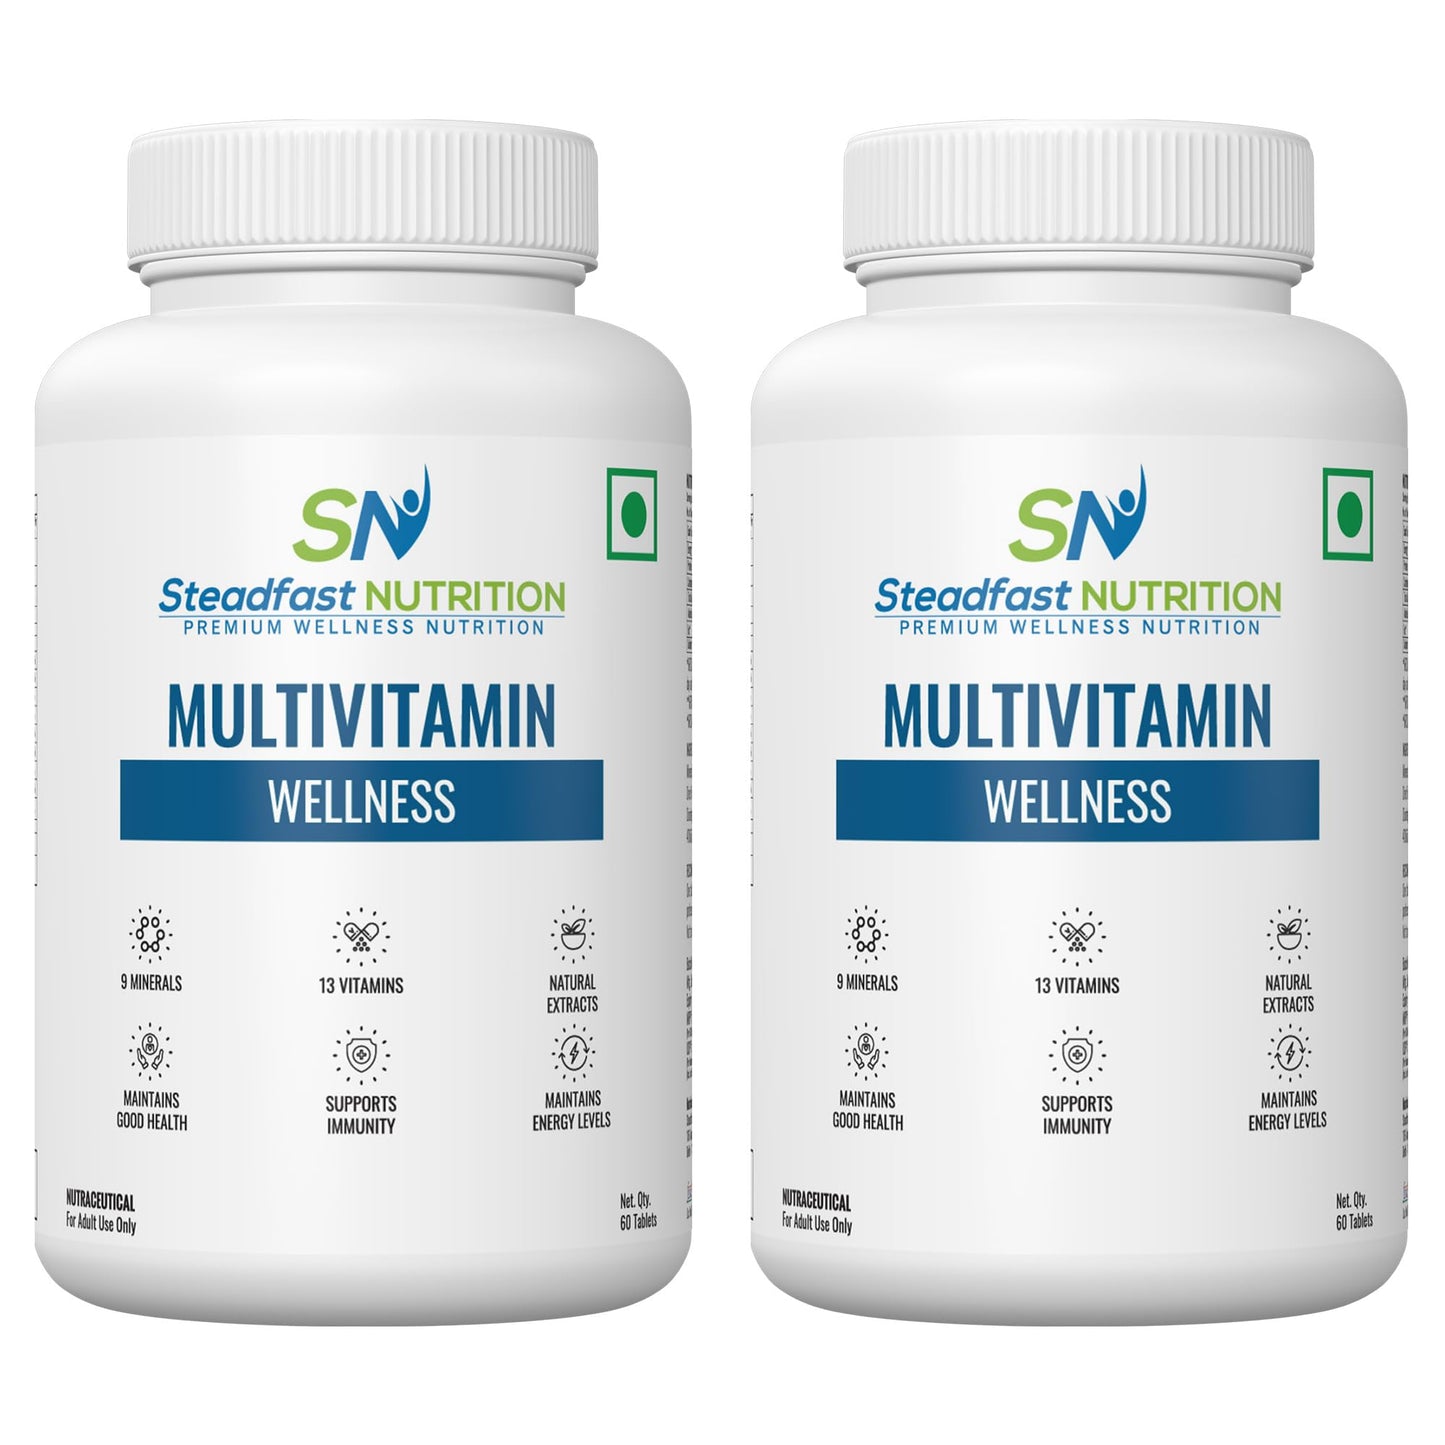 Steadfast Nutrition Multivitamin for Men & Women | Contains 30 Essential Vitamins & Minerals |12 Vit Gym, Workout & Athletics, 120 Capsule (Pack of 2)